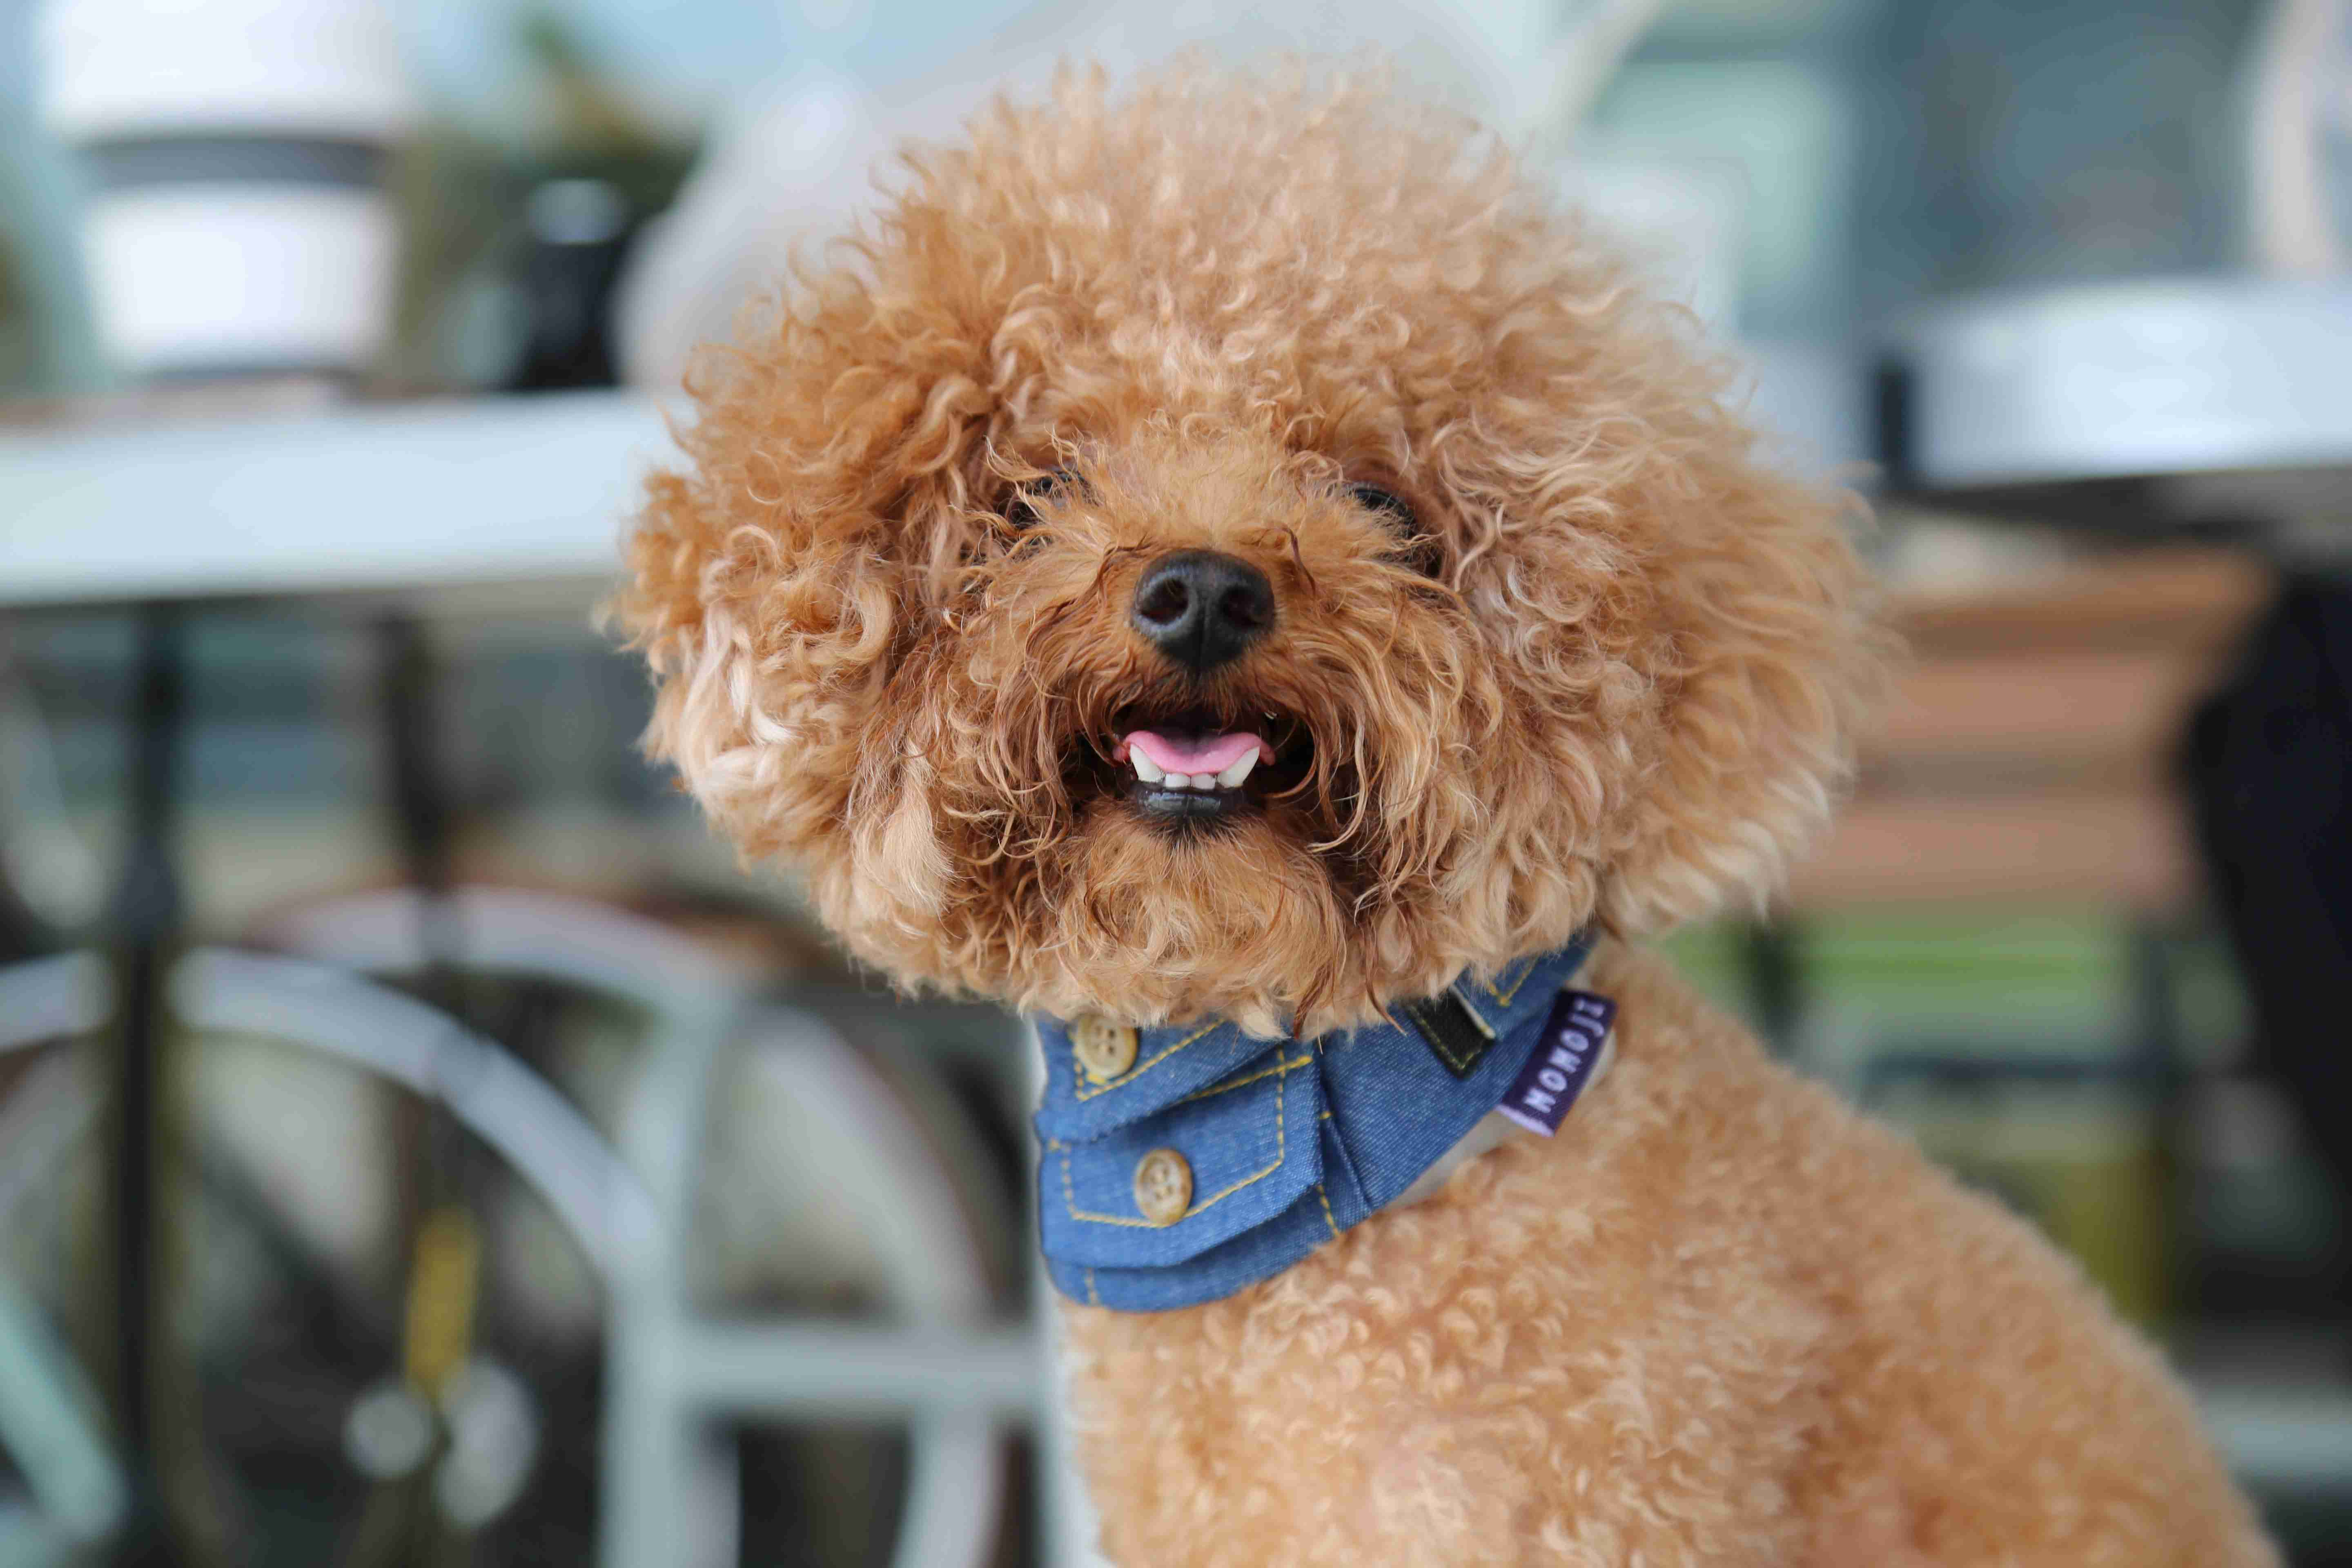 What should you do if your Poodle puppy shows signs of aggression towards other dogs or animals?